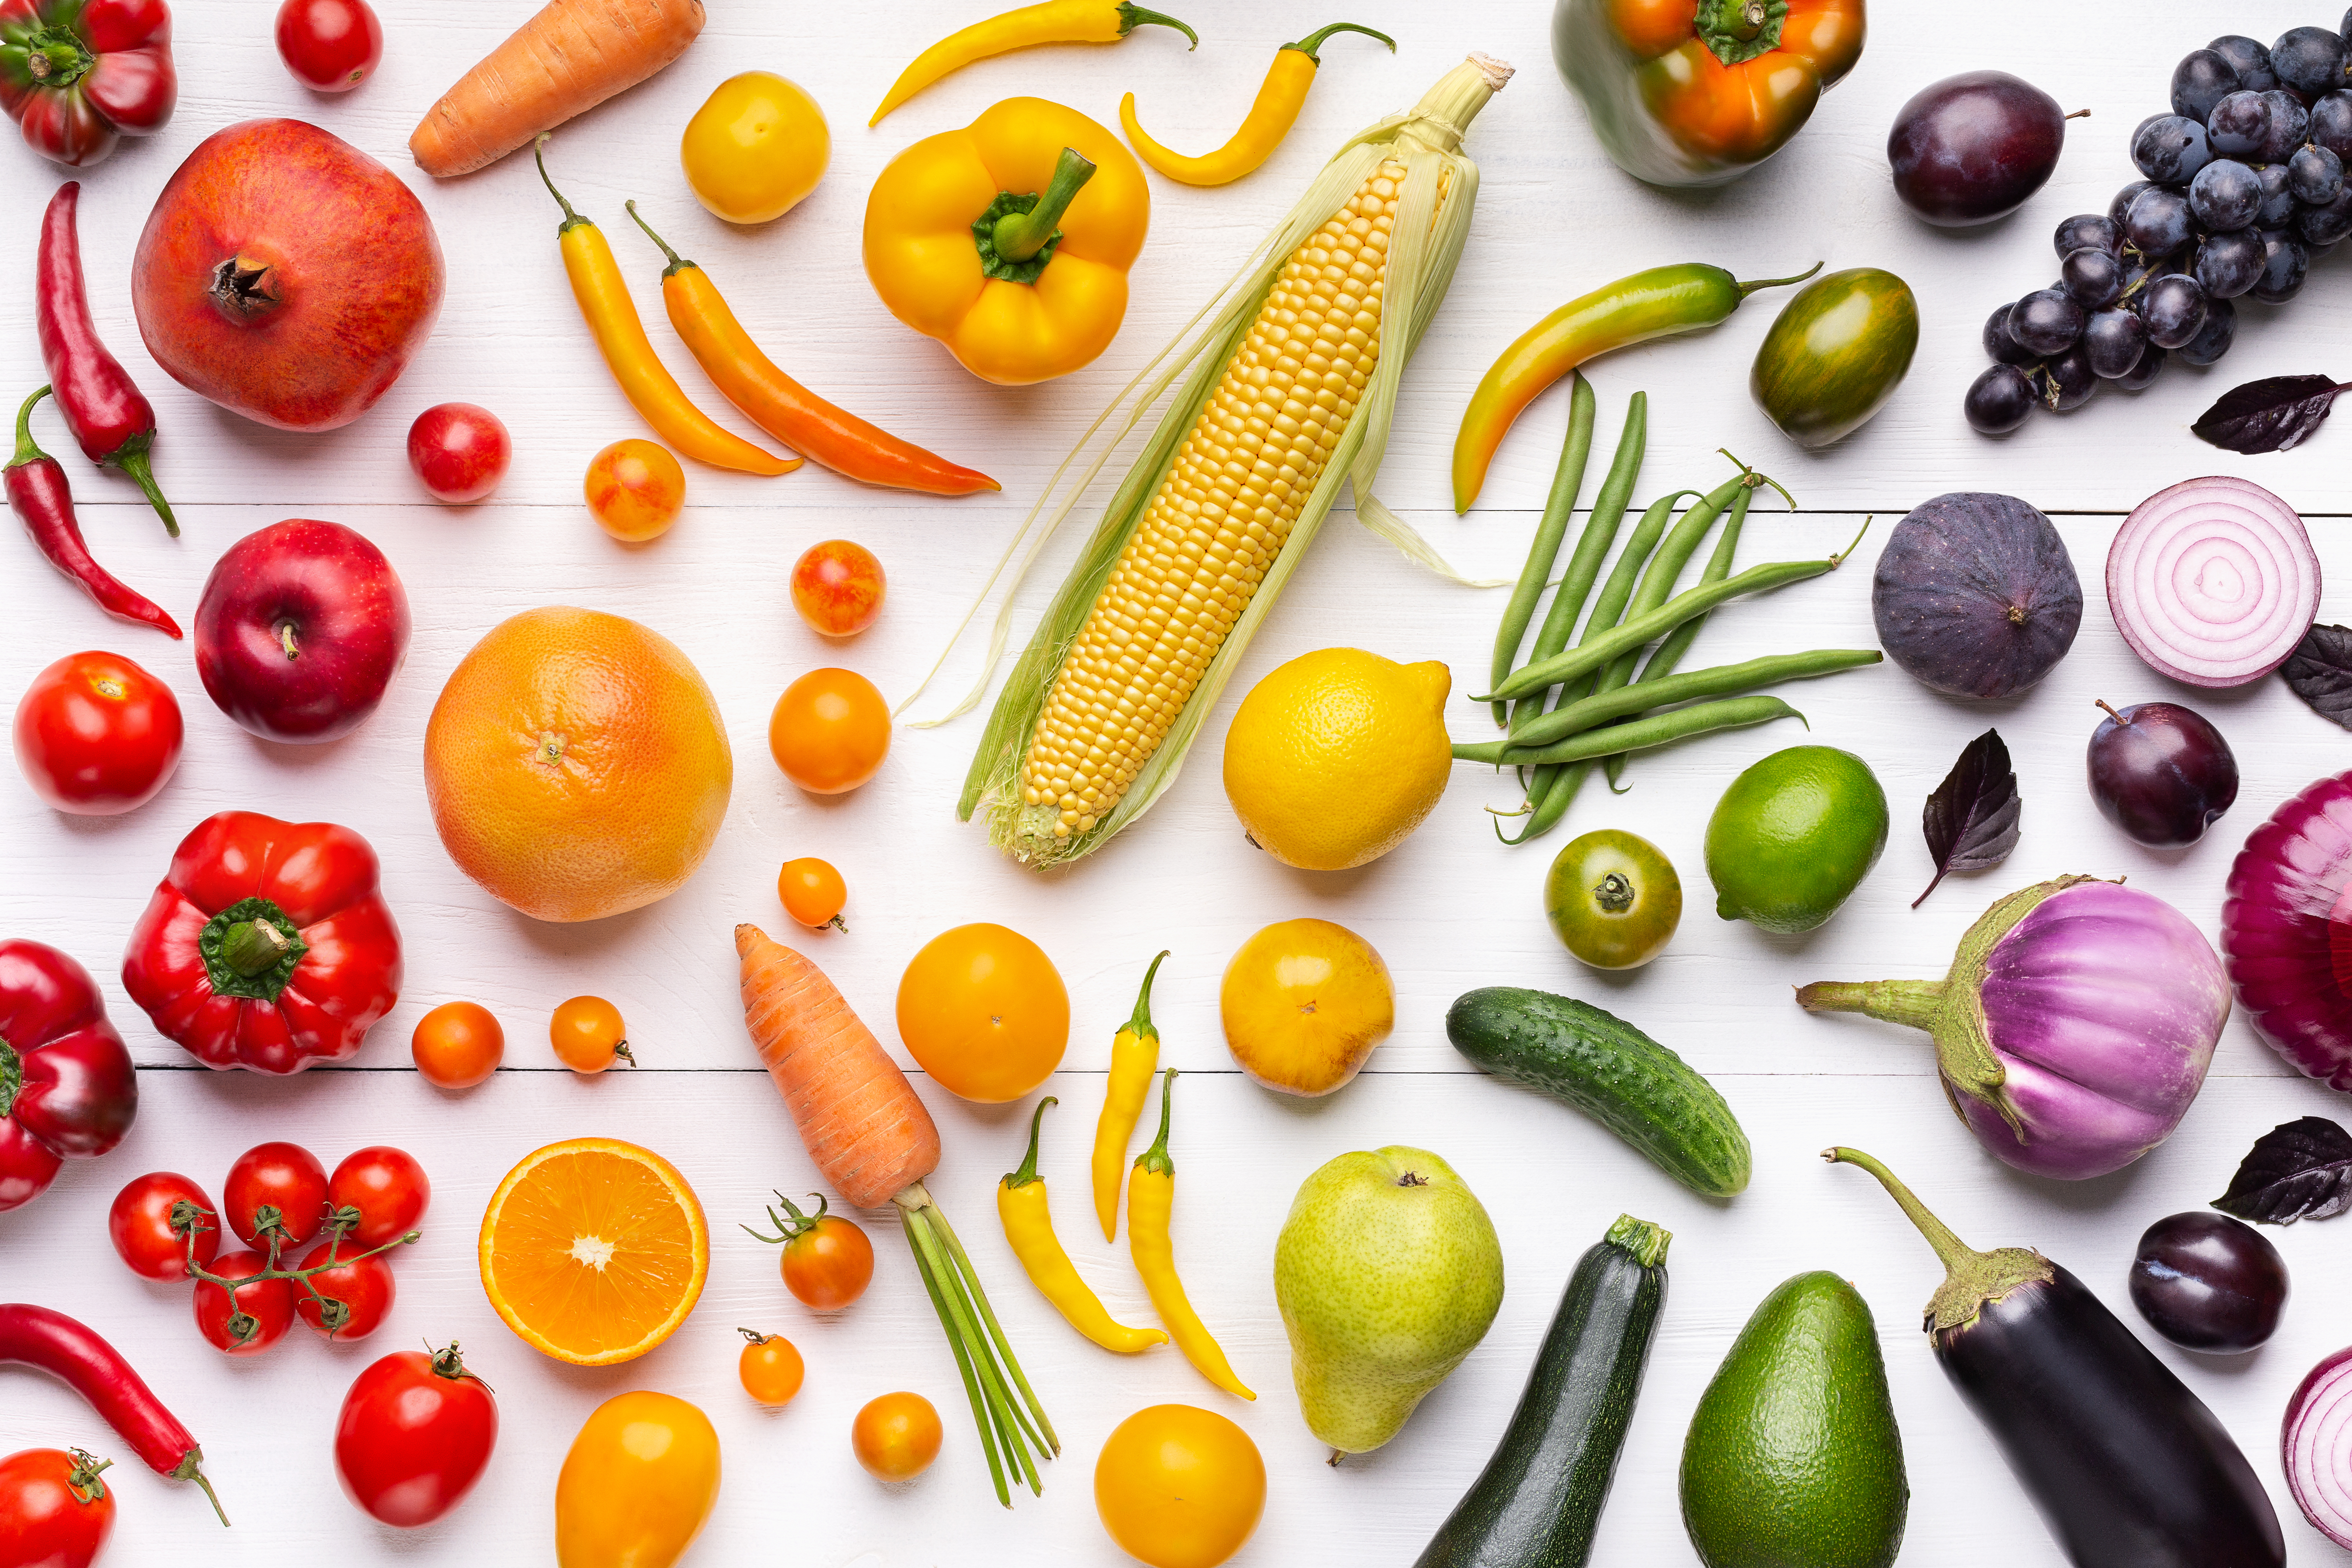 composition-of-fruits-and-vegetables-in-rainbow-co-82DUL49